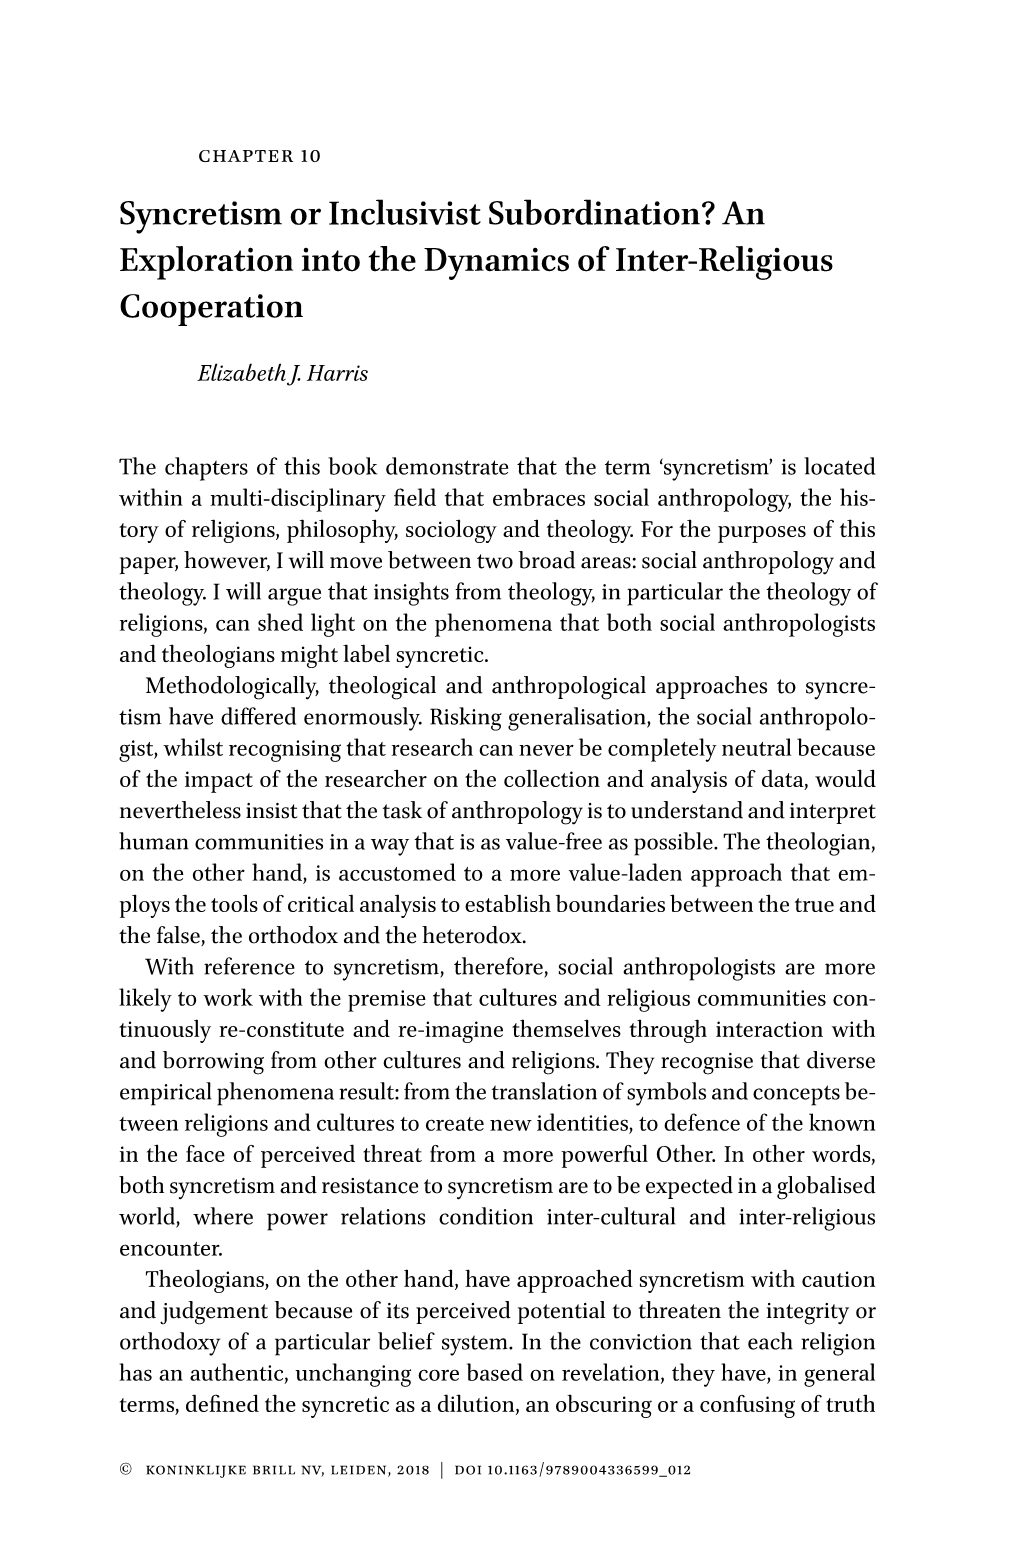 Syncretism Or Inclusivist Subordination? an Exploration Into the Dynamics of Inter-Religious Cooperation